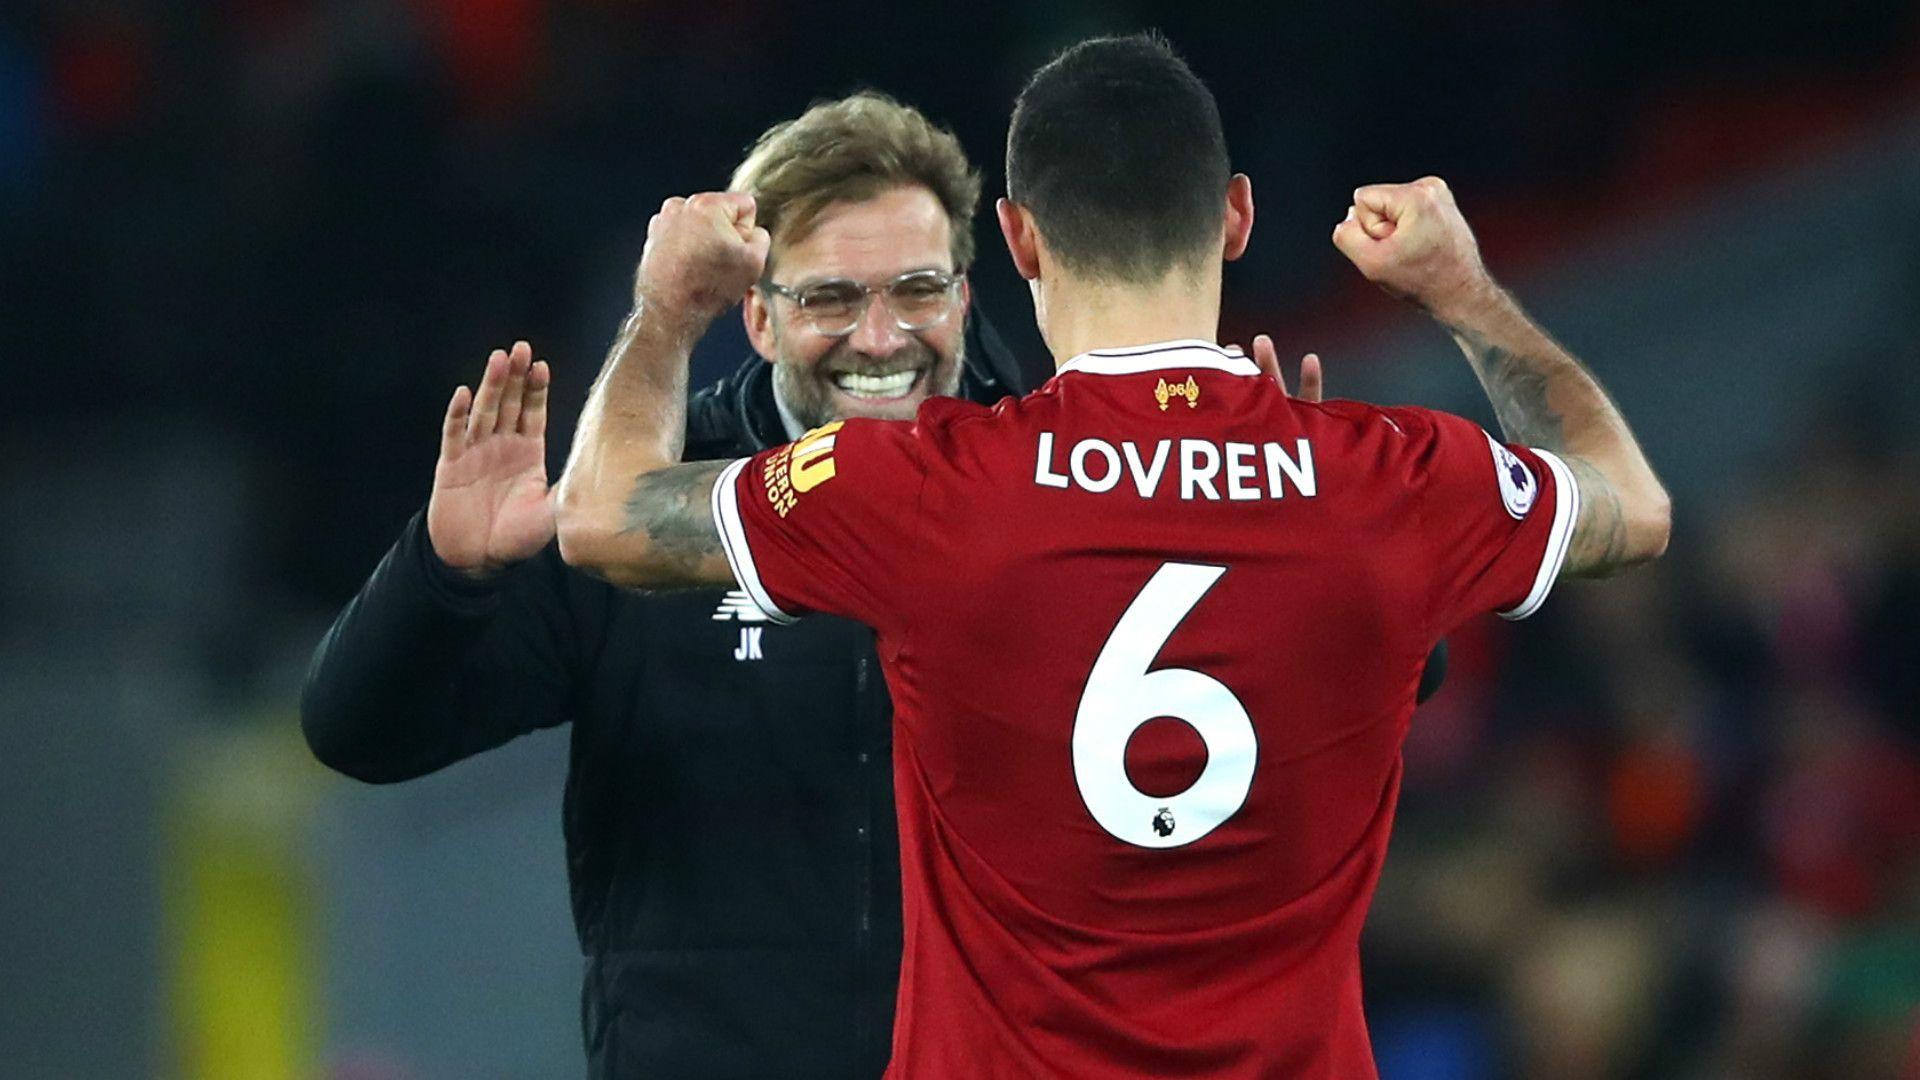 Lovren hits out at critics as Klopp backs defender to become world's